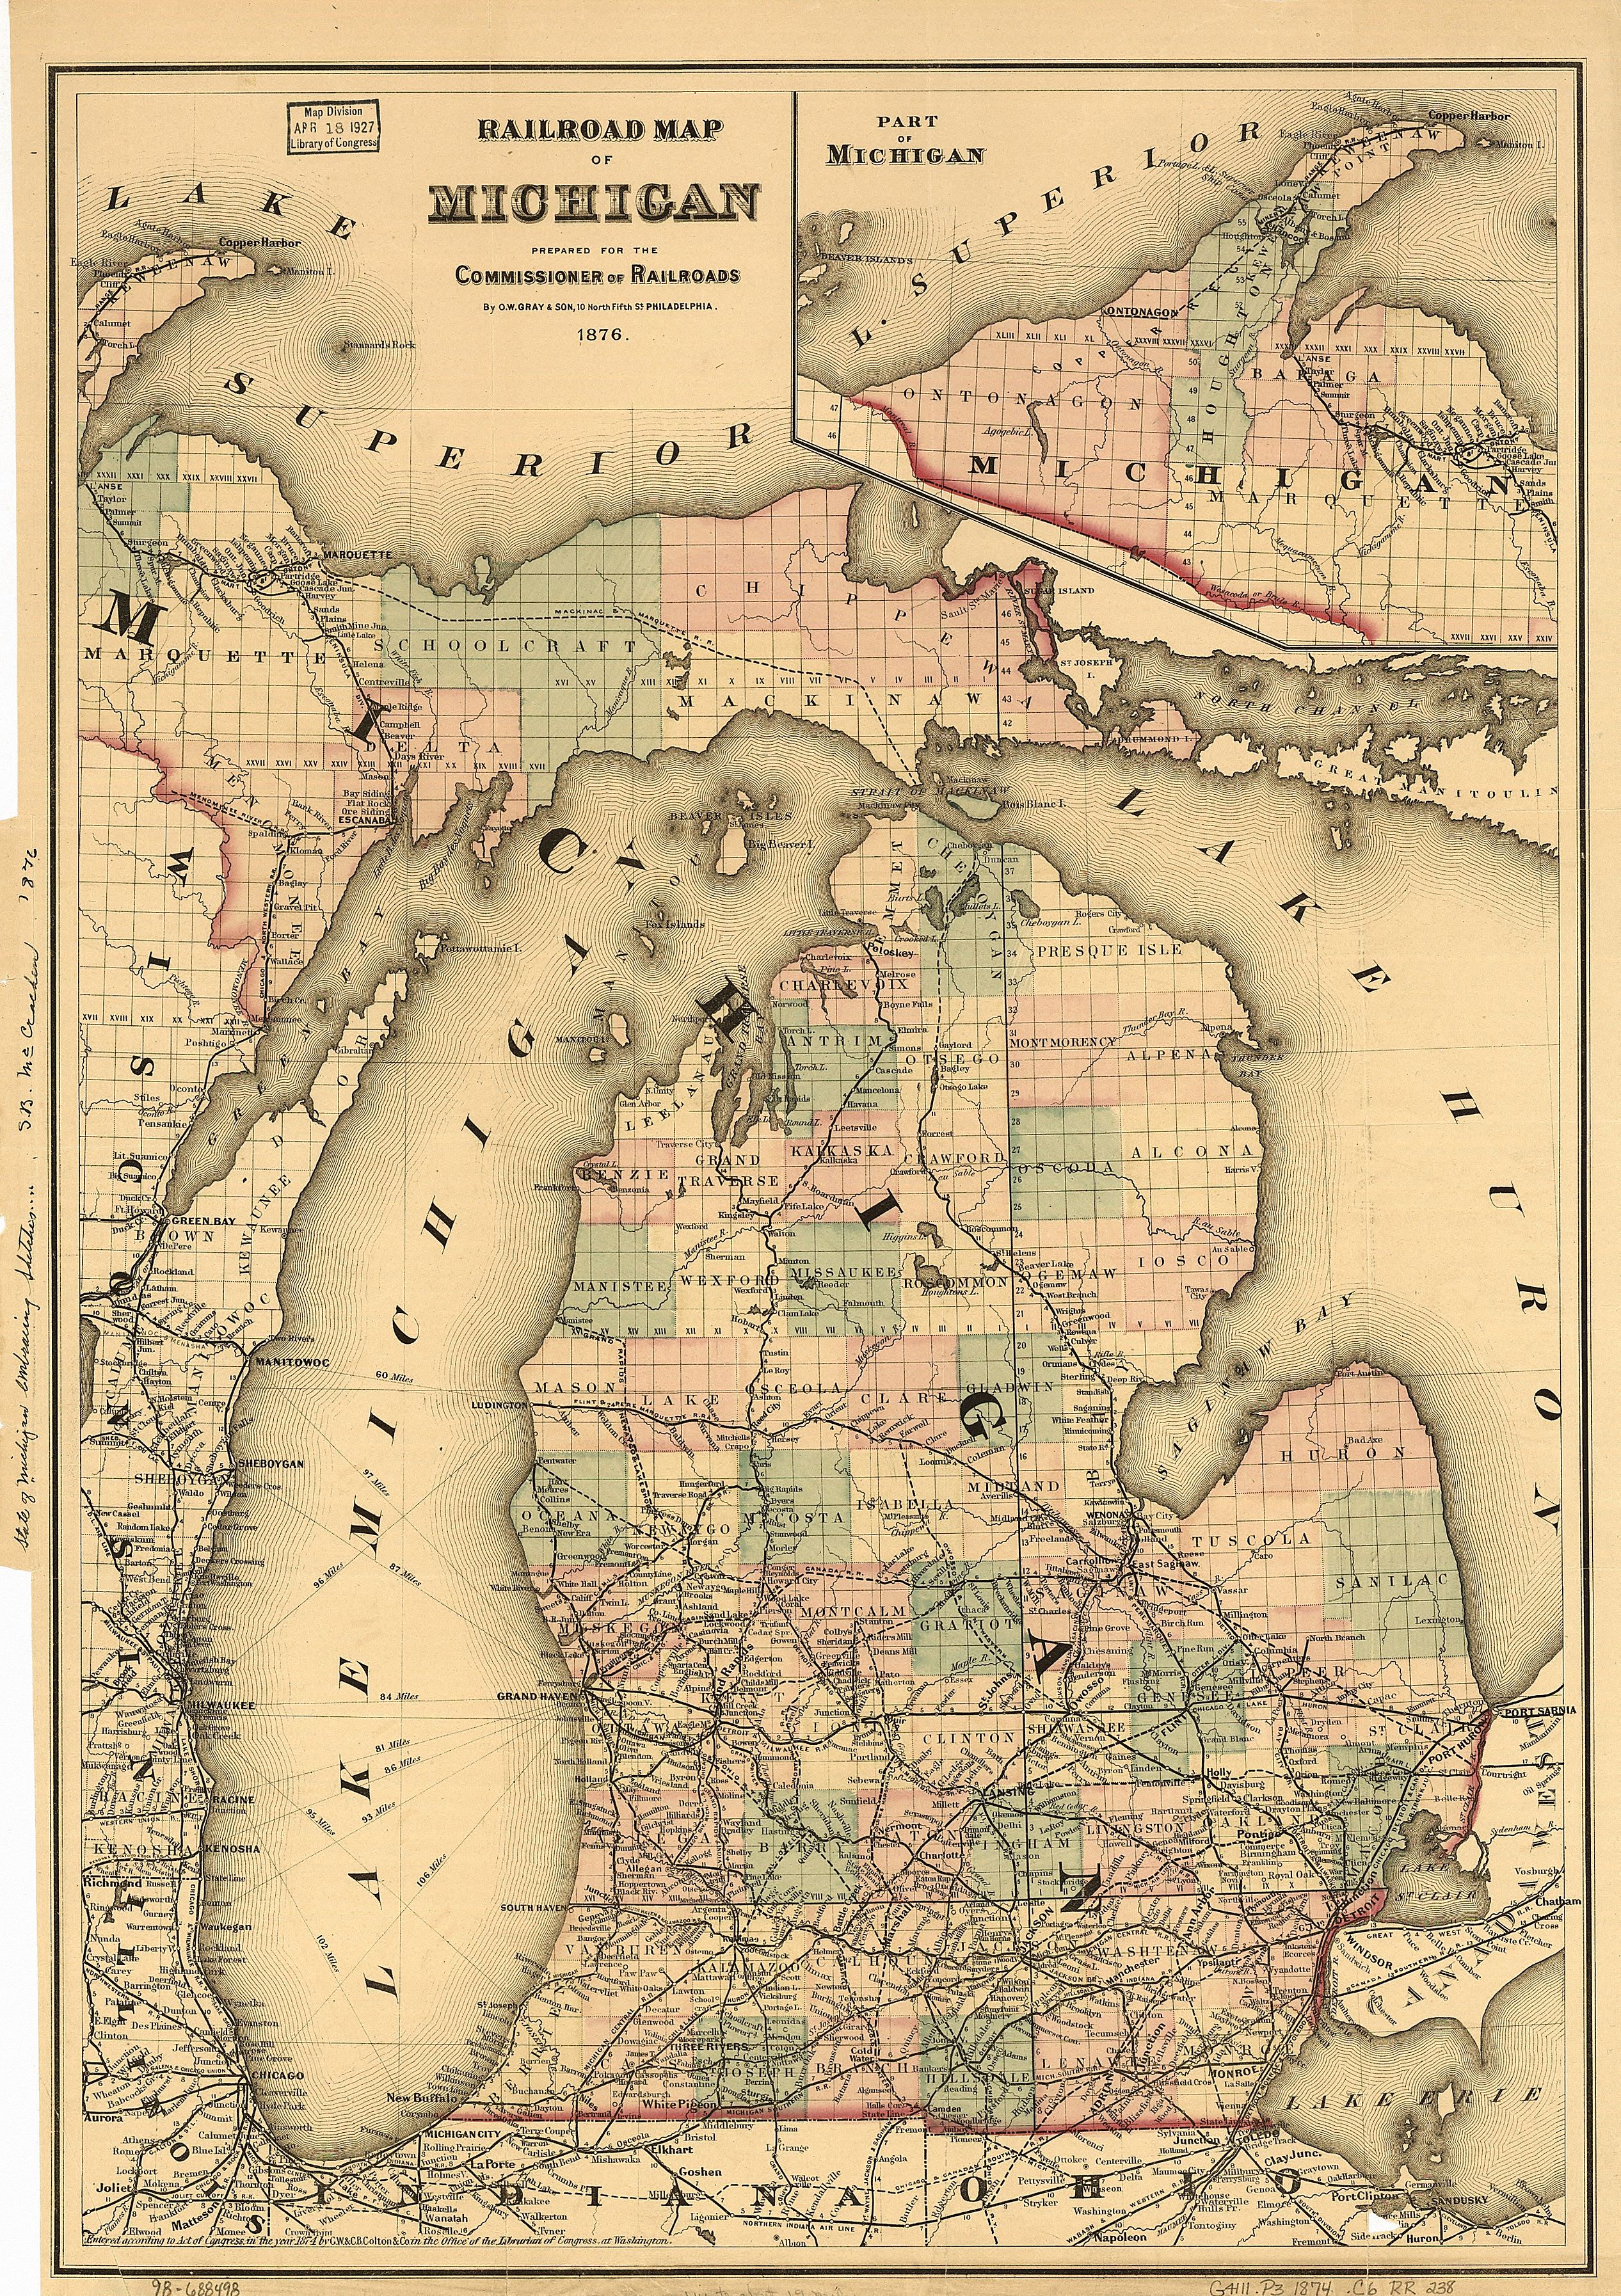 On this 1876 map, Duncan City is shown as a separate city east of Cheboygan in Cheboygan County.